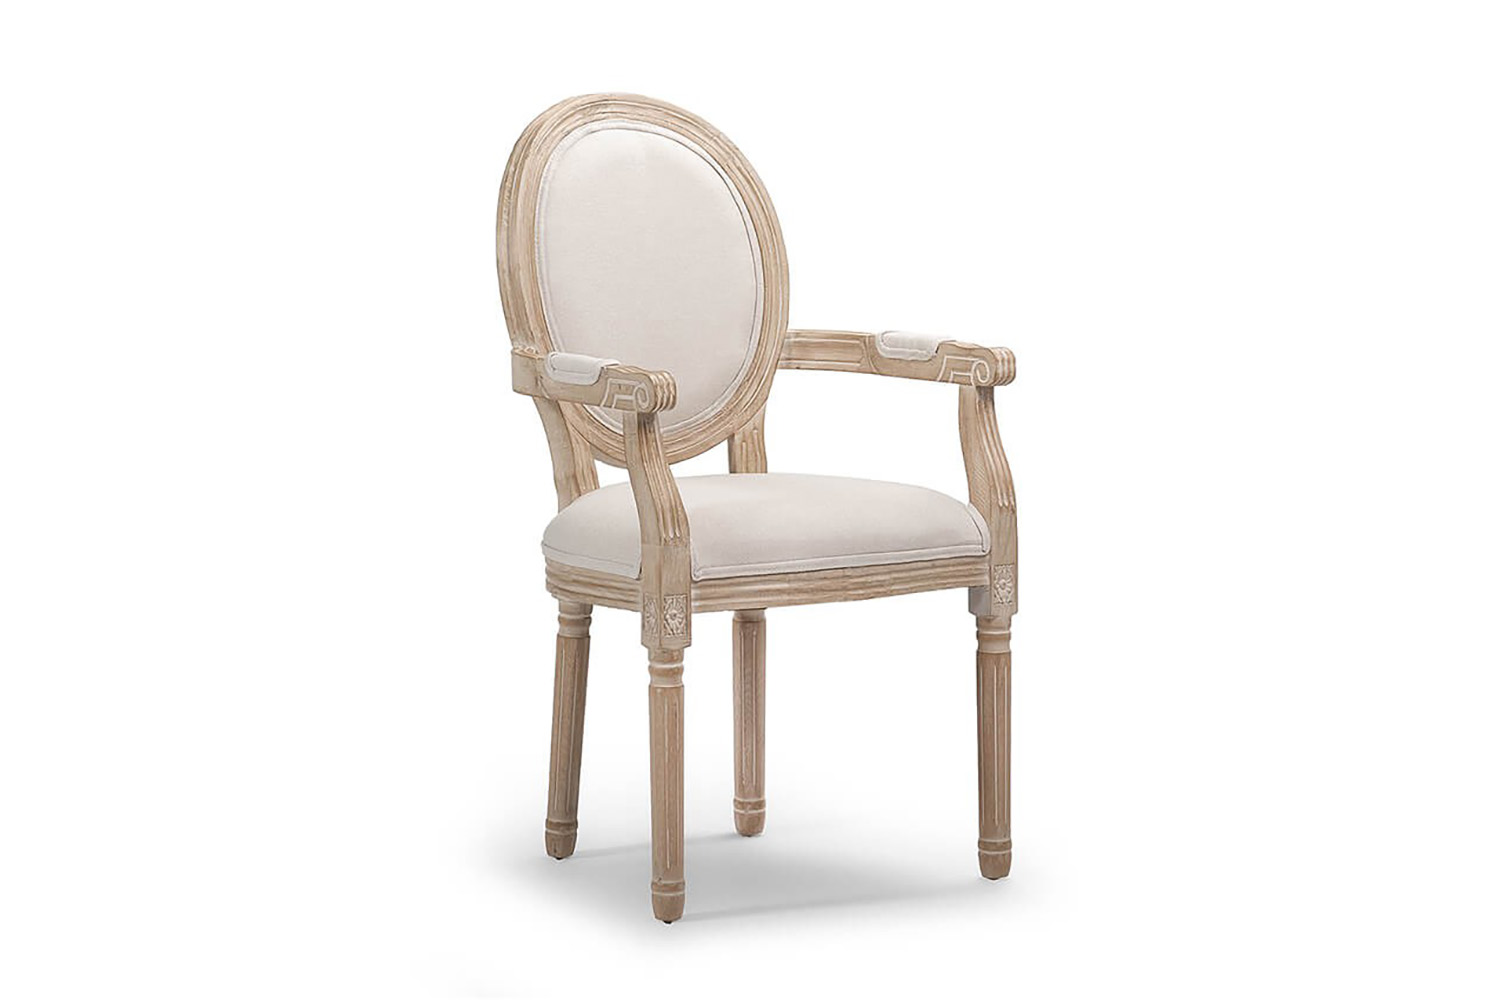 Olivia With Armrest Dining Chair, Should Dining Room Chairs Have Arms